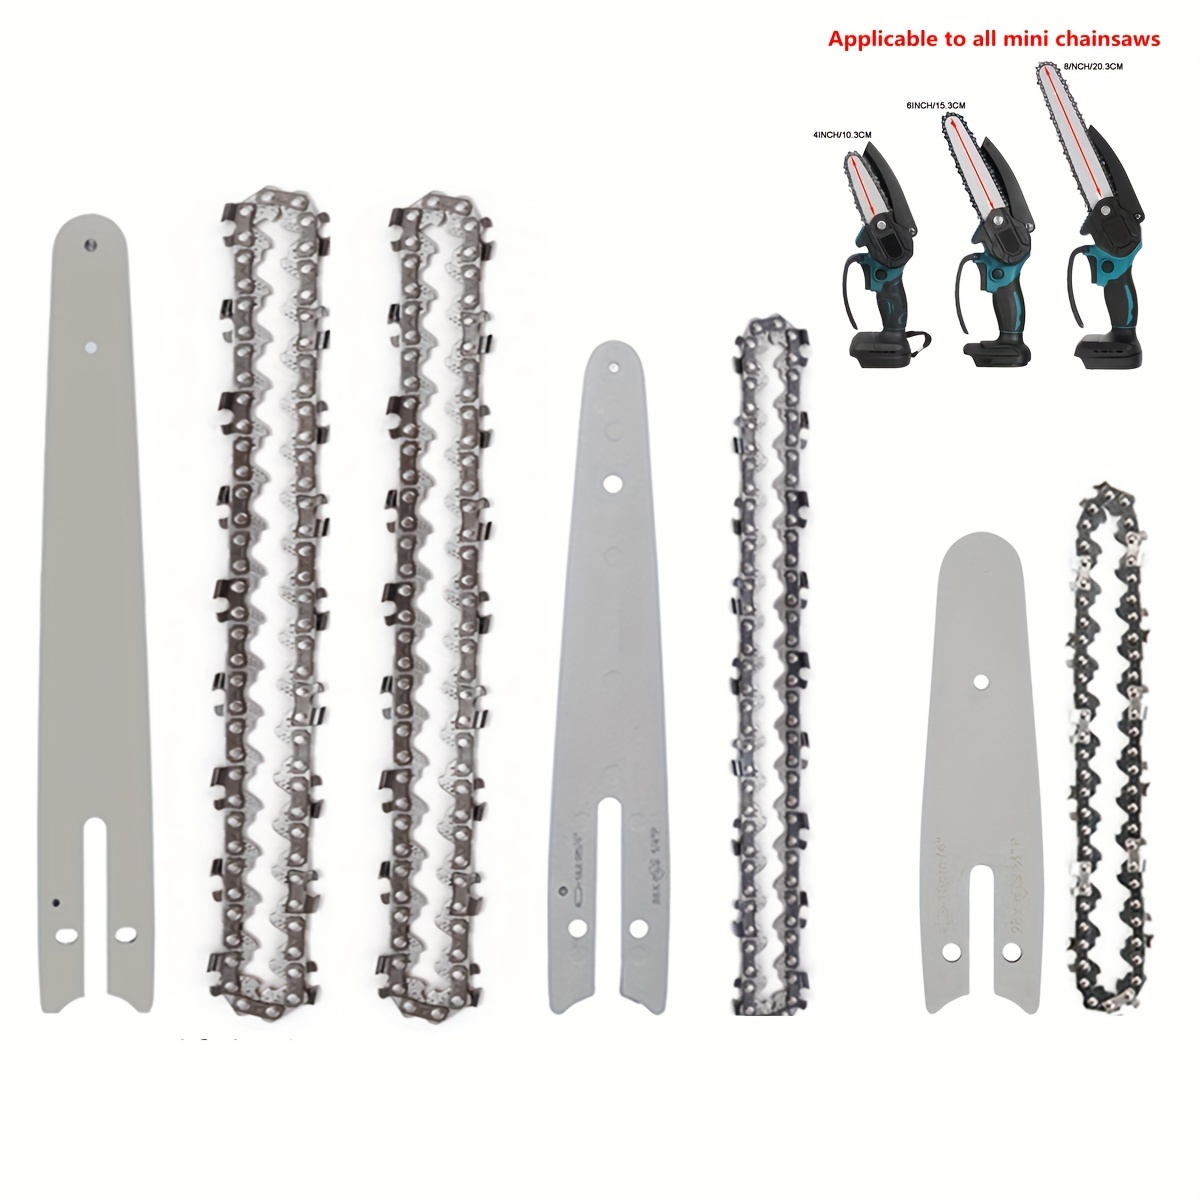 6 Inch Chainsaw Chain /Guide Bar Replacement For Mini Electric